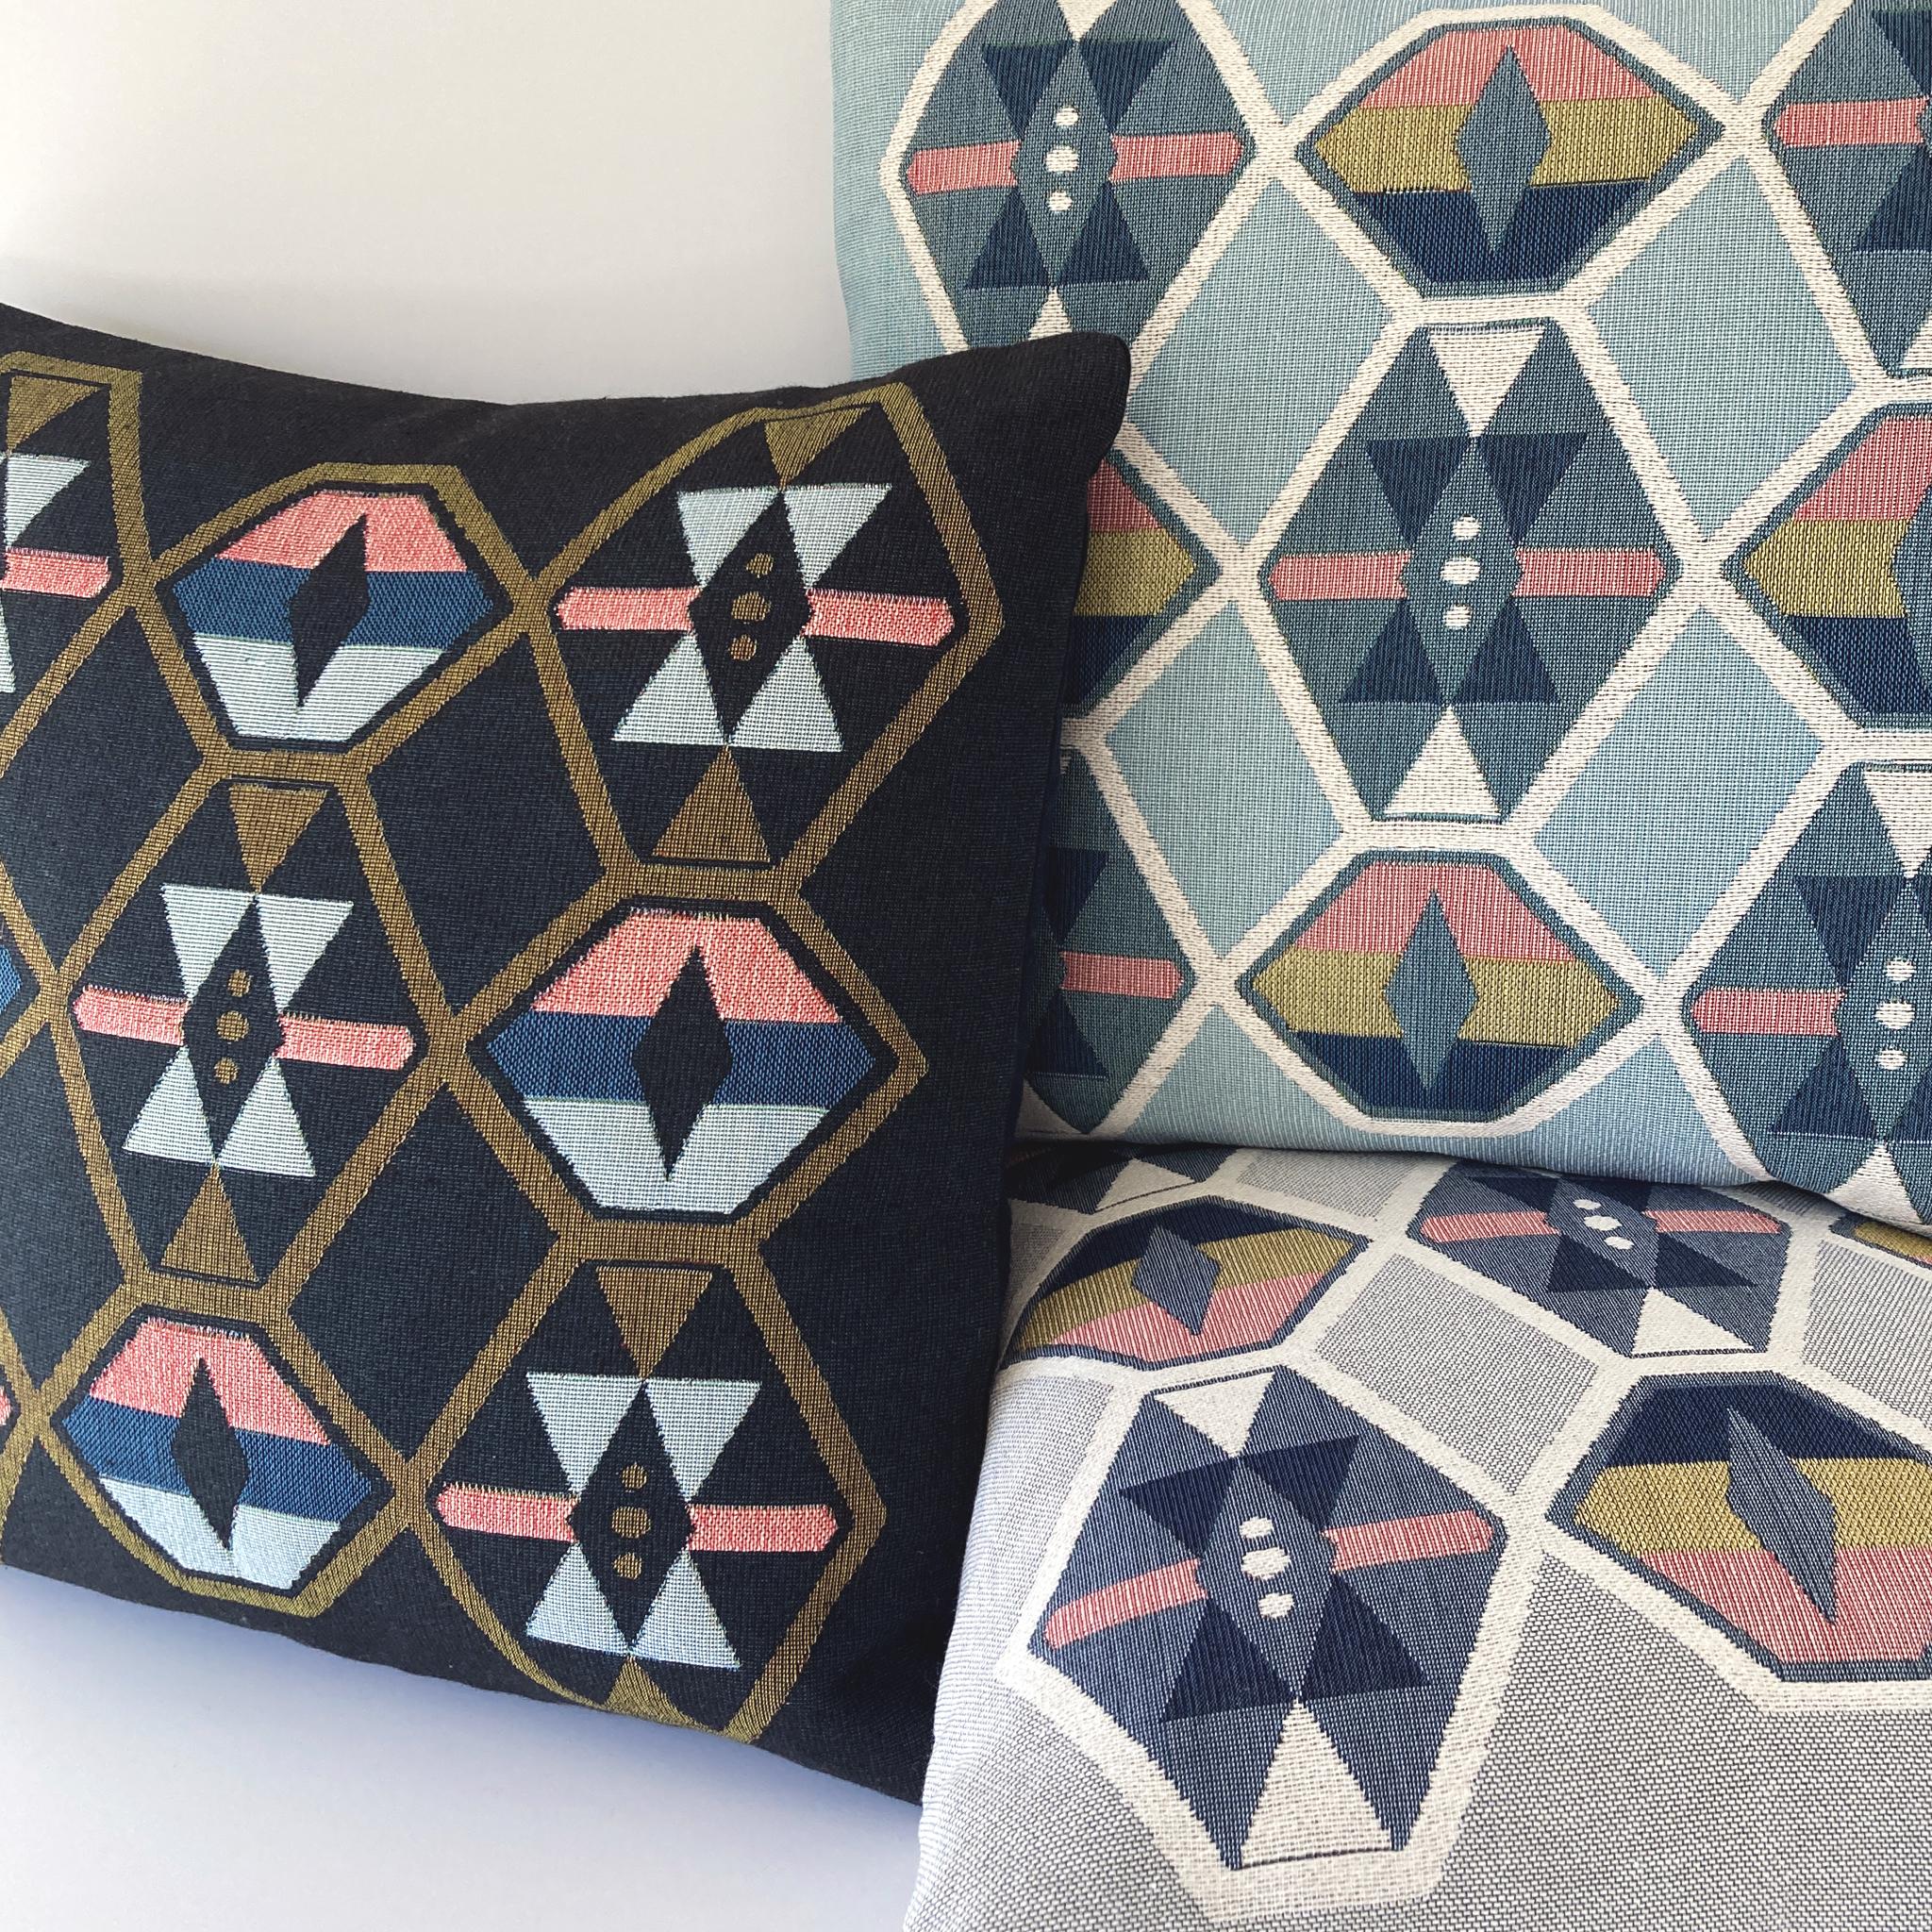 Twilight Navy geometric upholstered pillow with navy linen backing, down pillow insert made locally in NYC. Cotton upholstered fabric woven on a jacquard loom, made in the US. Pillow measures 17 x 17 inches.

The geometric patterned pillow is